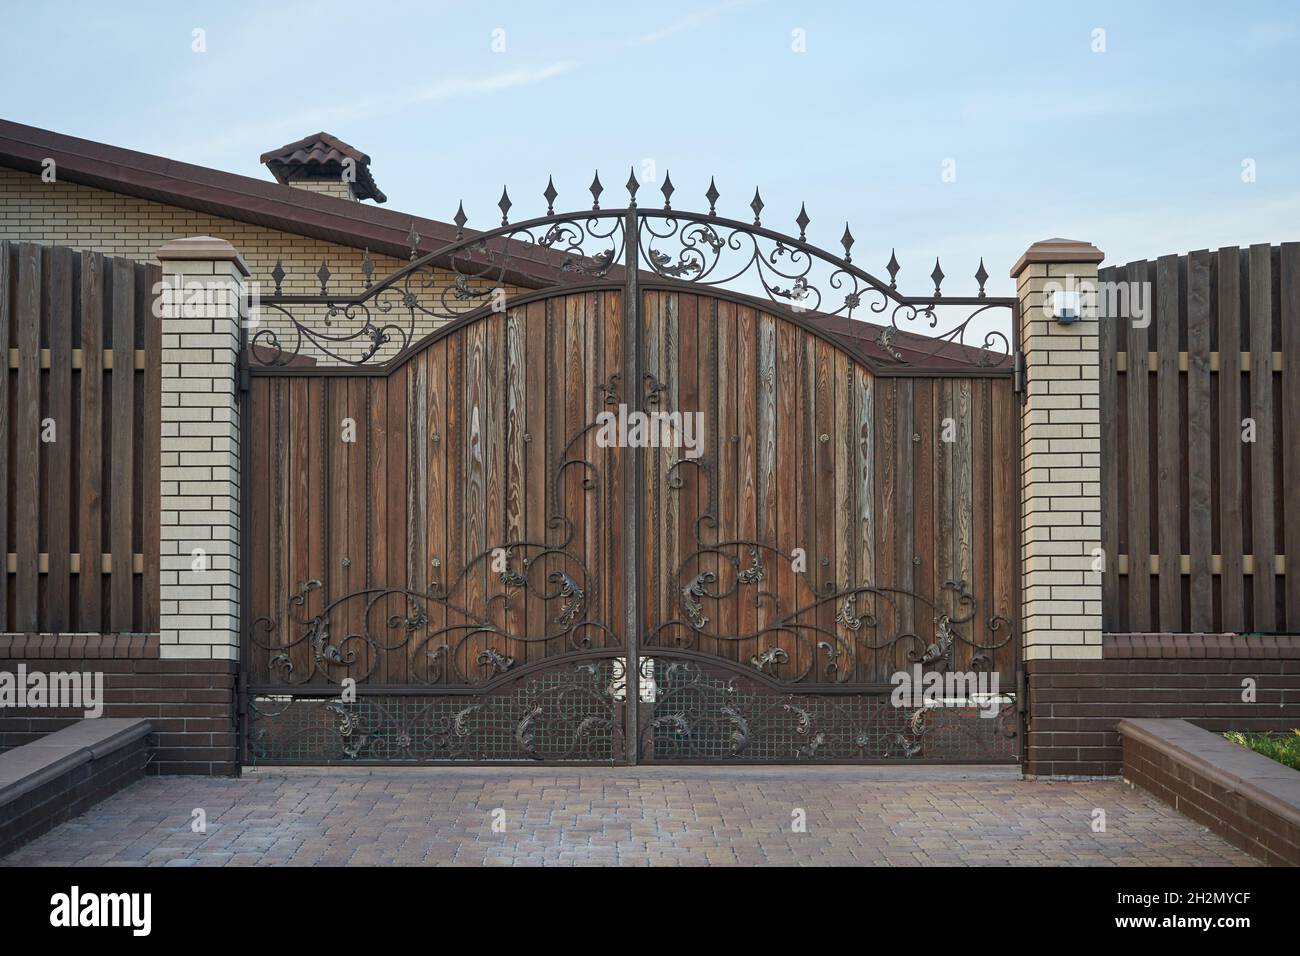 Private Metal Gates And Fence With Wooden Planks Stock Photo - Alamy